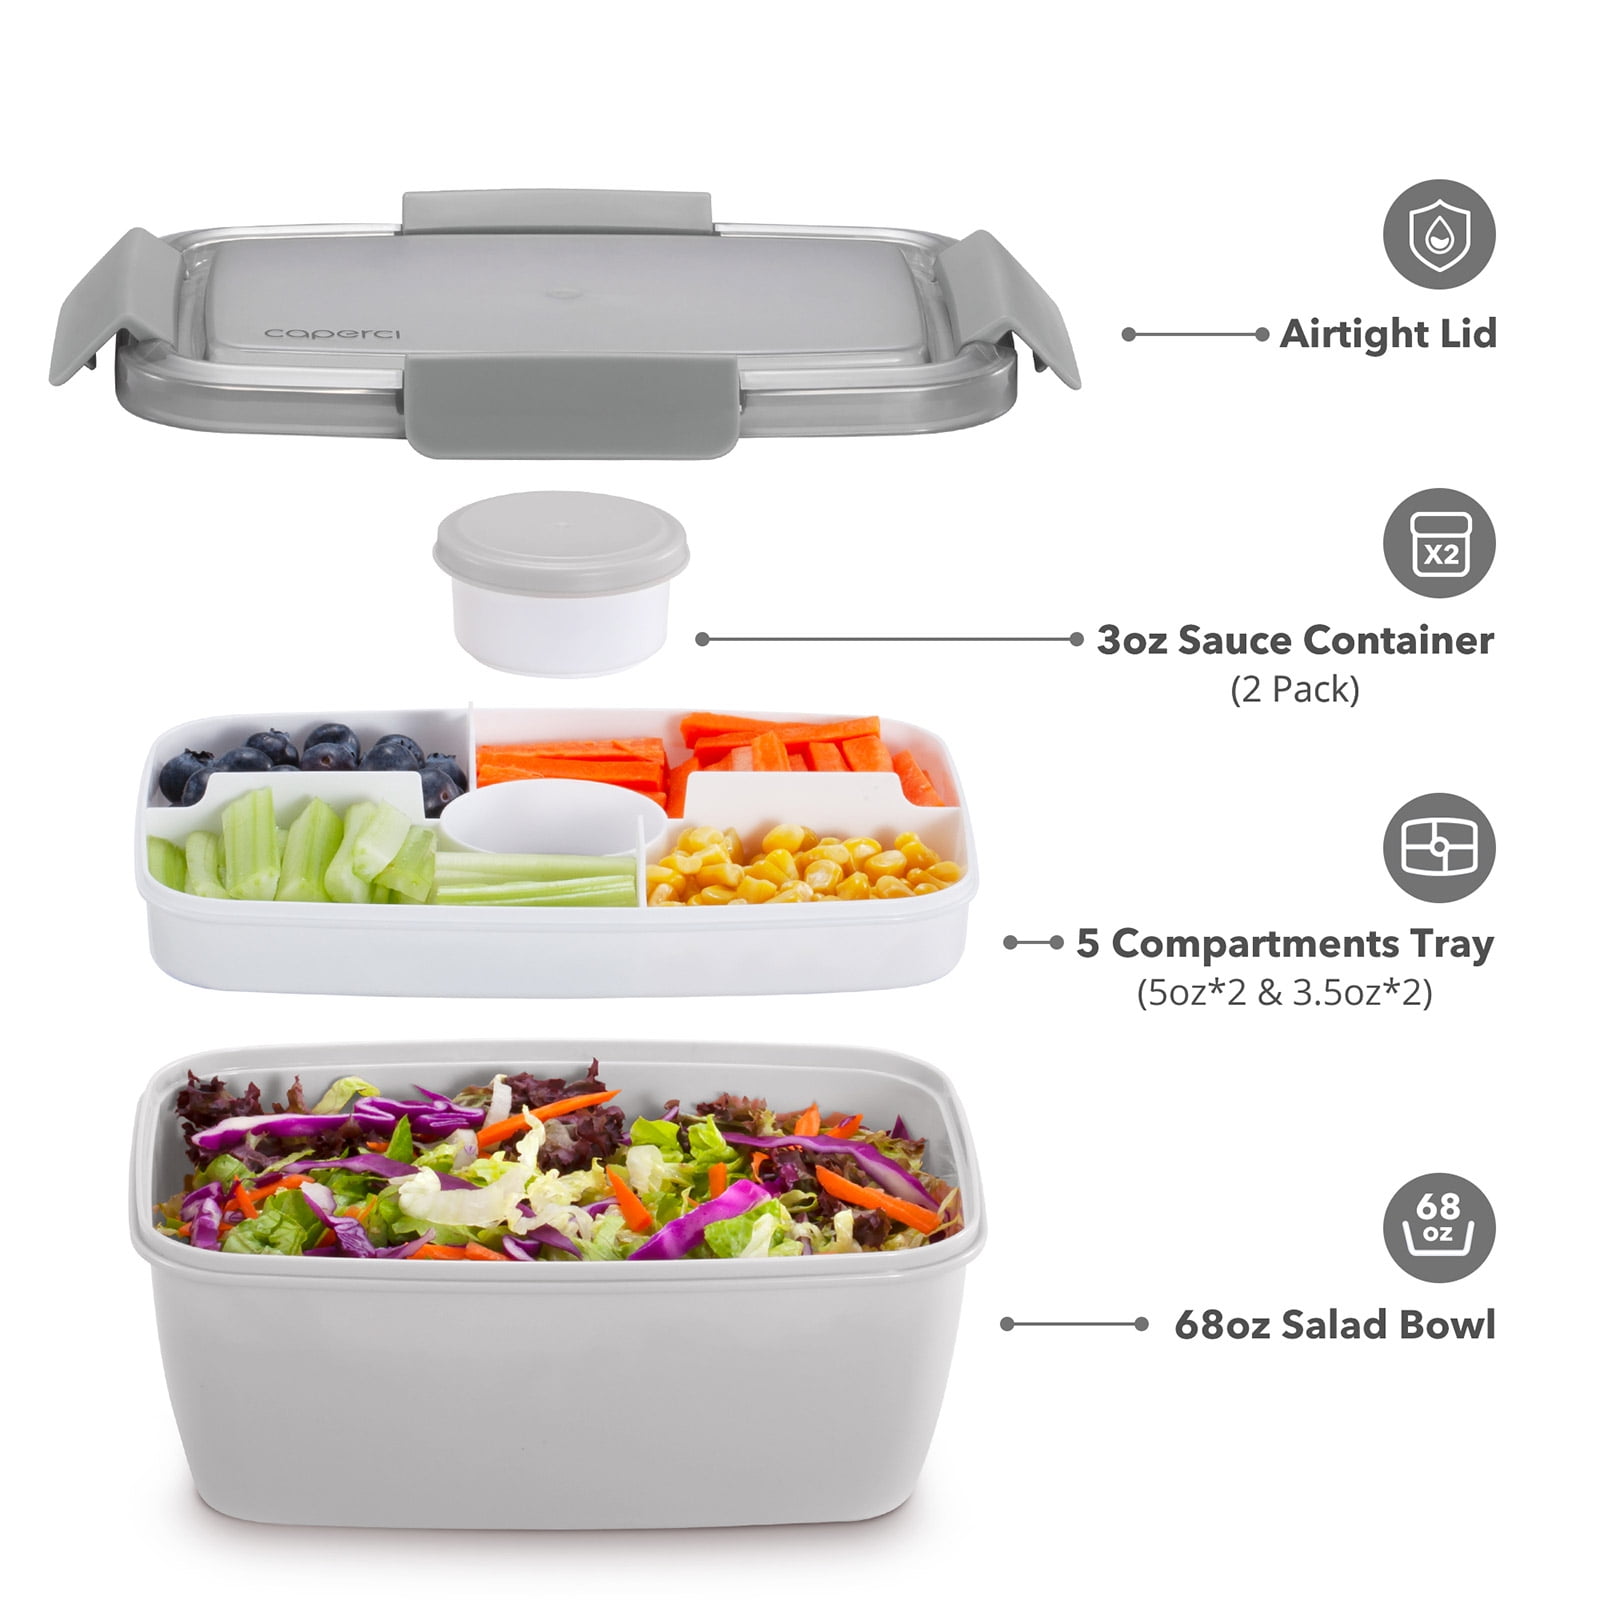 Caperci Large Salad Container Bowl for Lunch - Better Adult Bento Lunch Box  68 oz, 5-Compartment Tra…See more Caperci Large Salad Container Bowl for